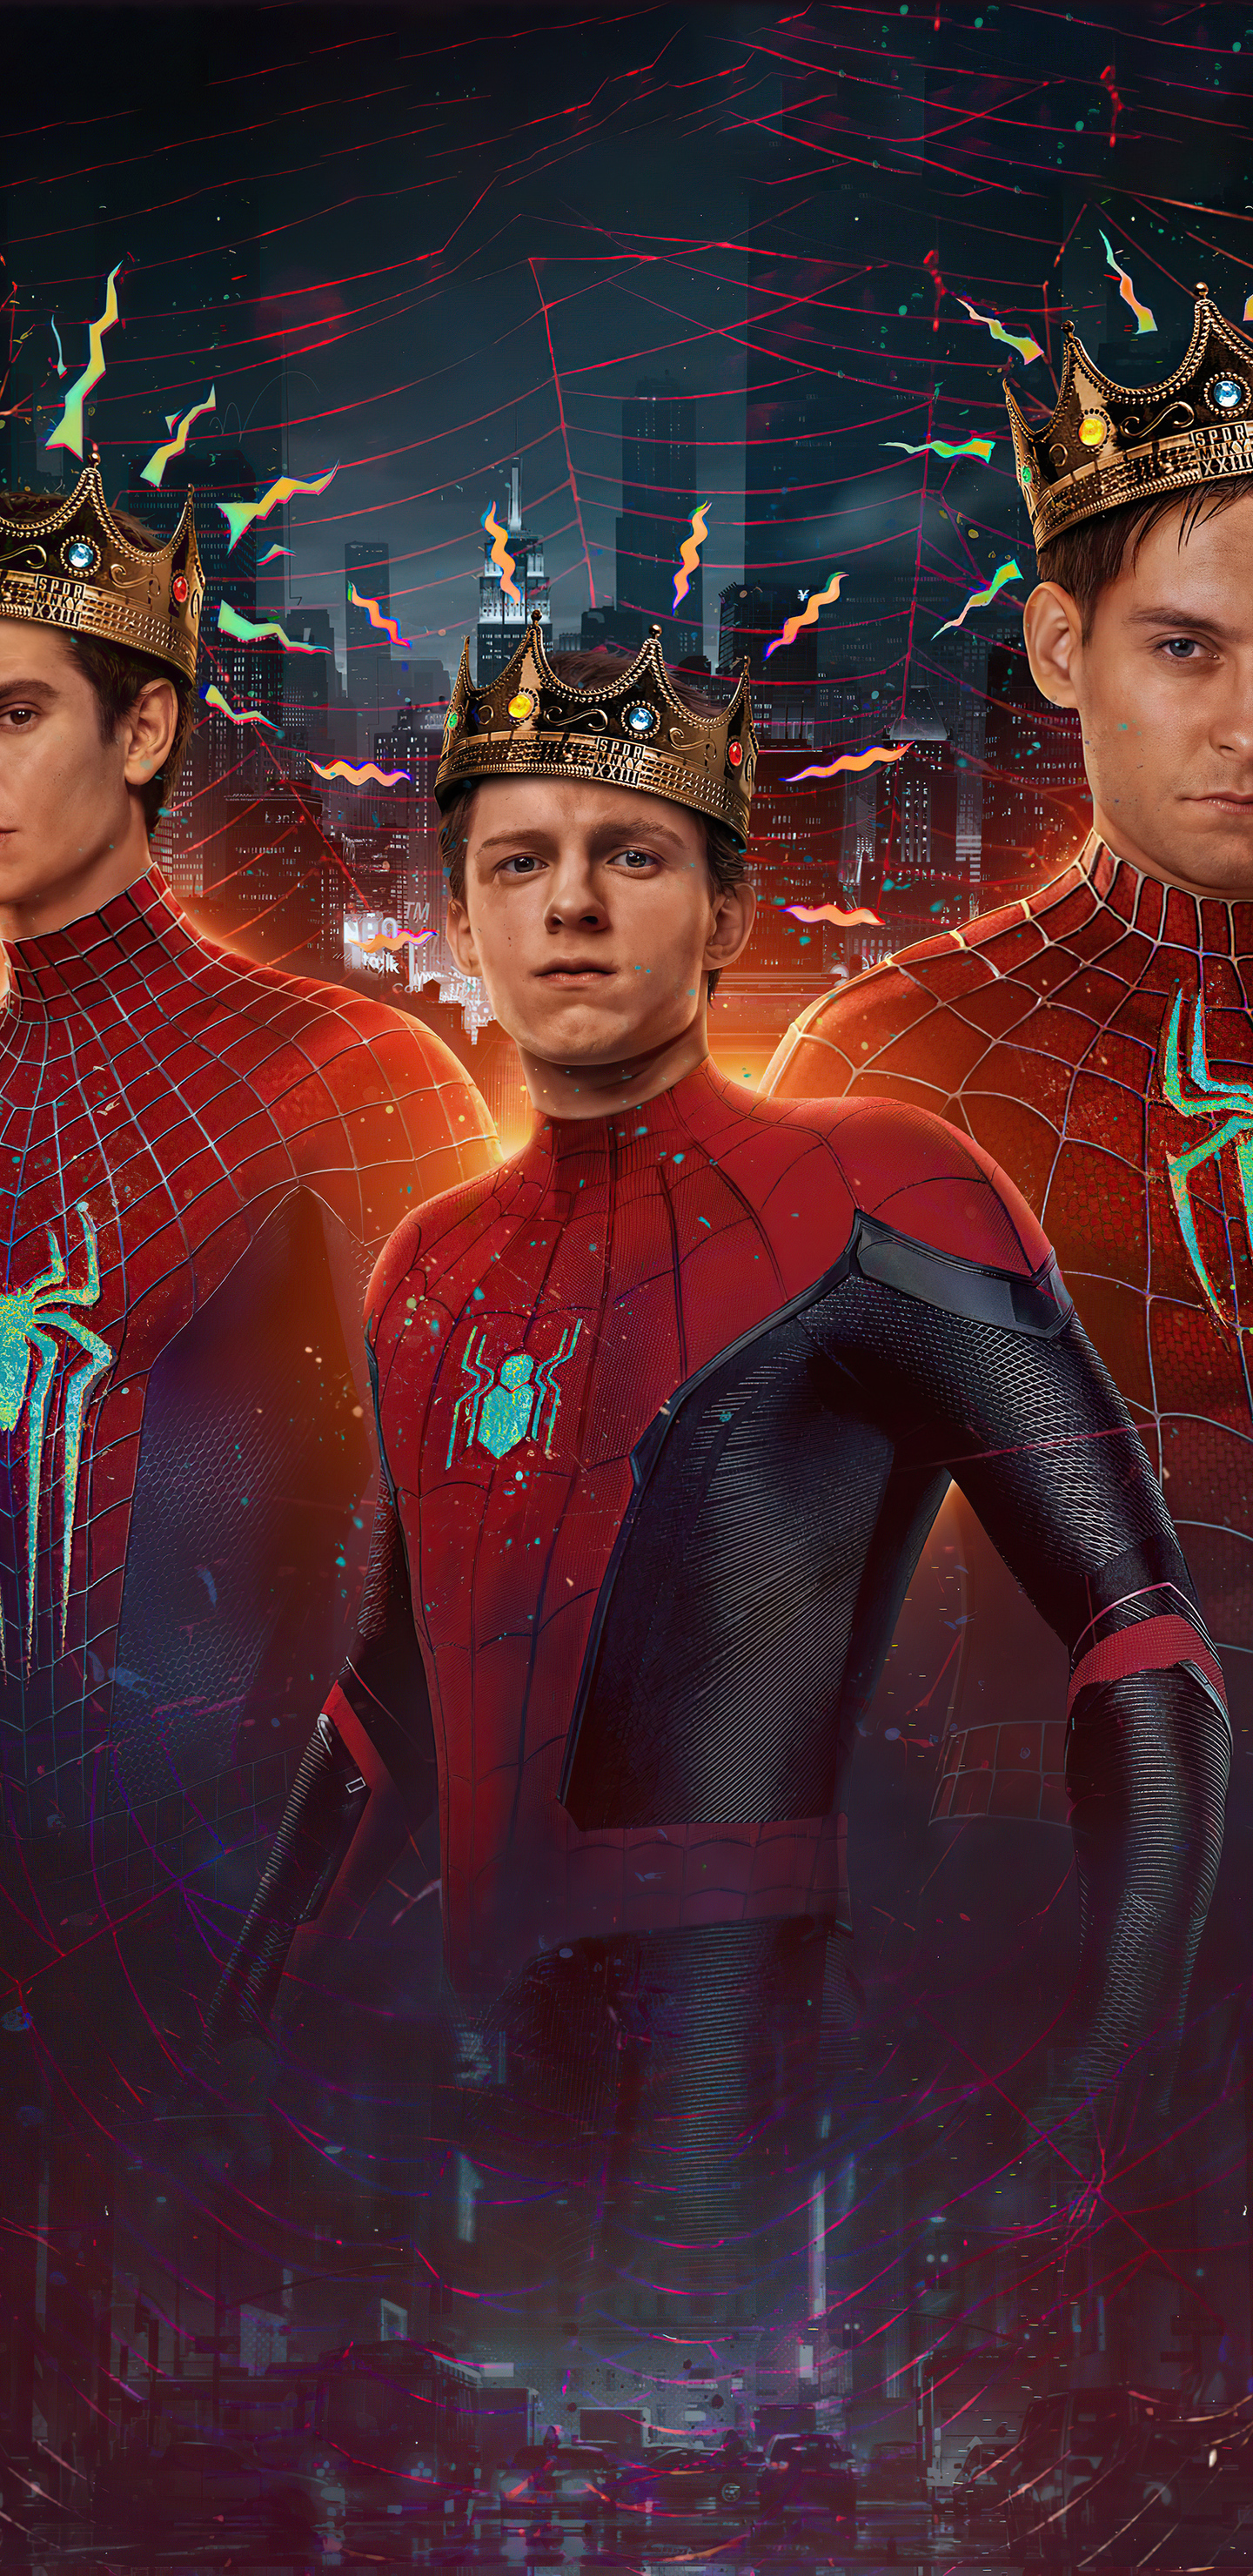 spidermannowayhome-peterparker-tobeymaguire-andrewgarfield-tomholland-spiderverse-l1.jpg